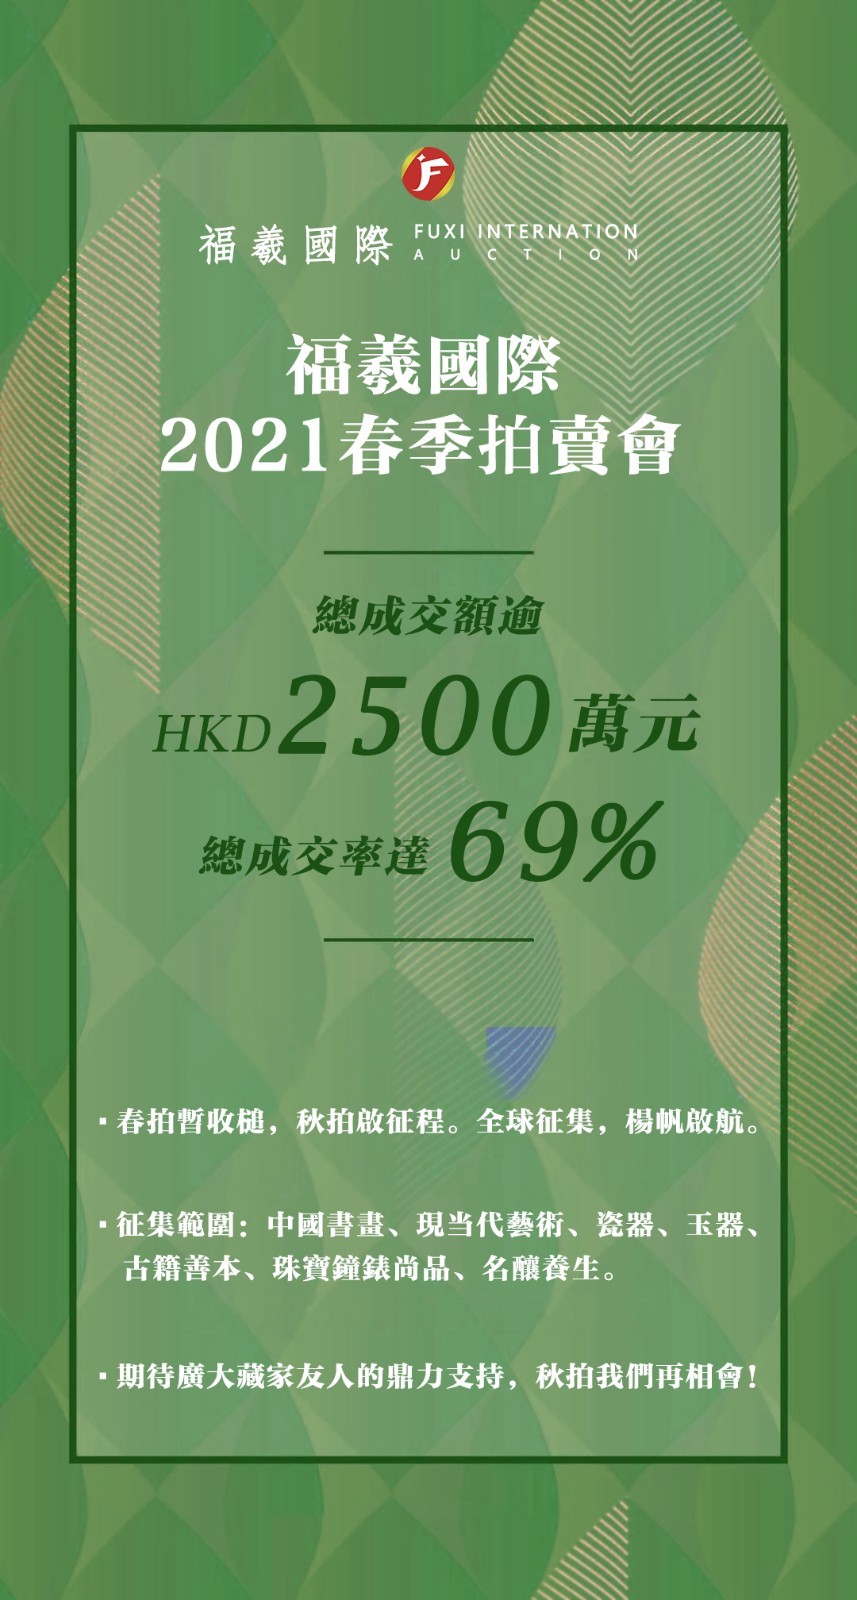 福羲拍�u香港2021｜春季拍�u��喜�@2500�f元，���仁仔�A�M收槌